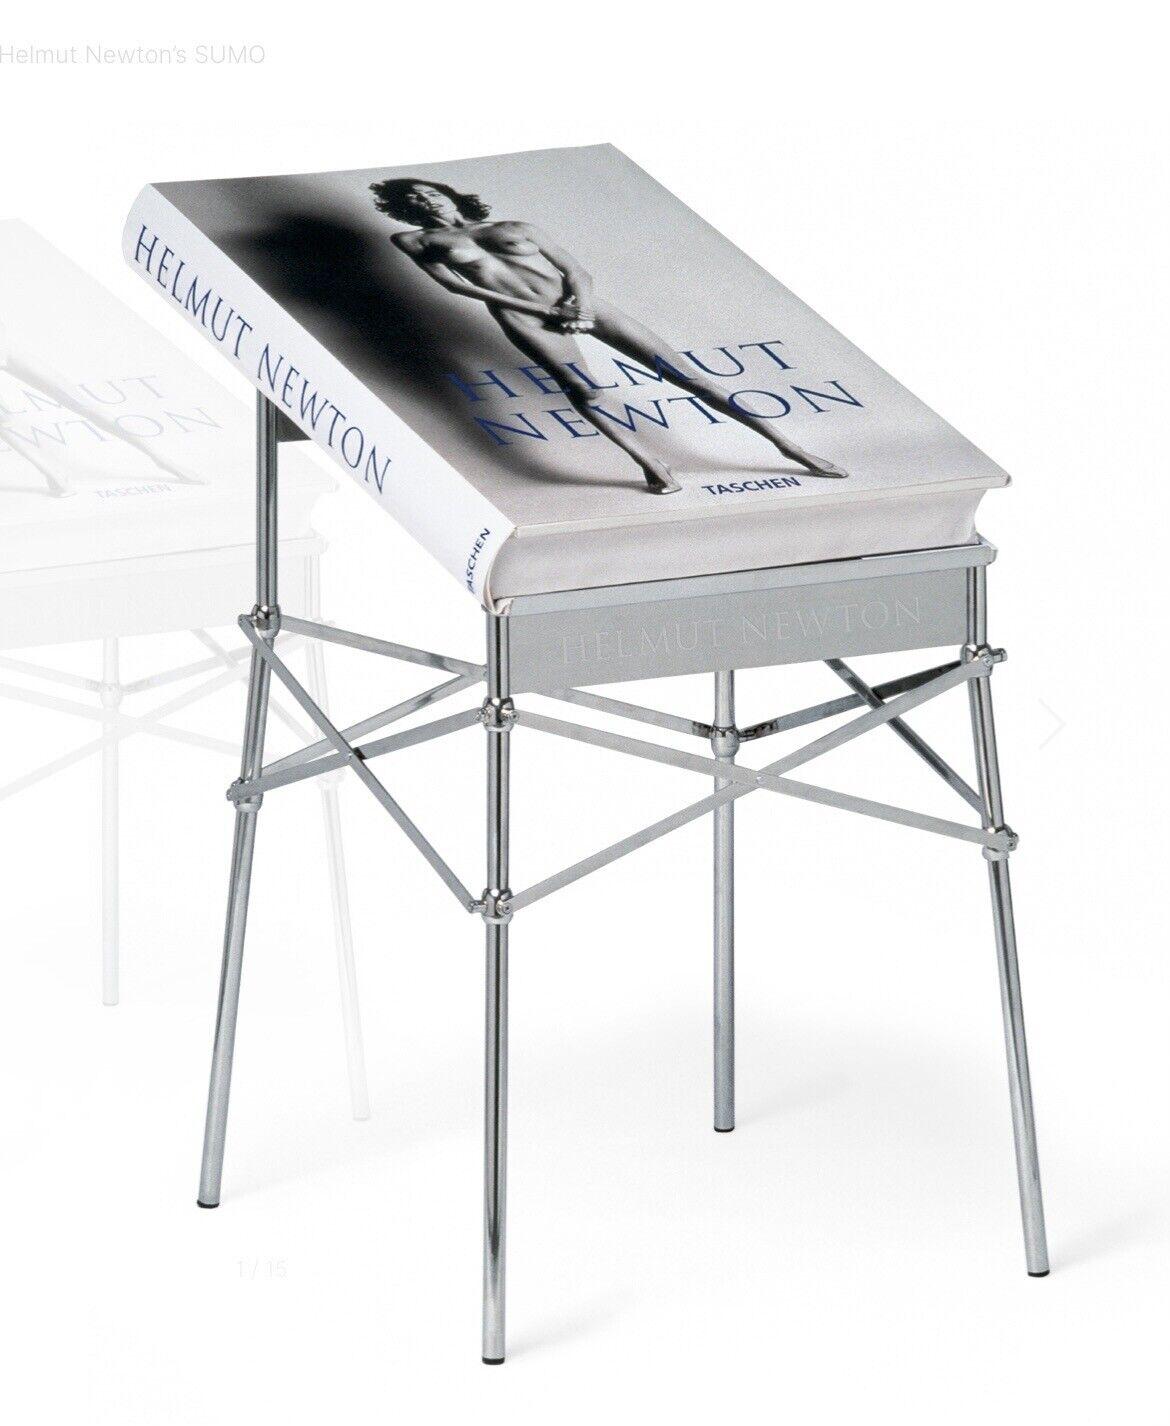 Helmut Newton’s SUMO - Edition 08065 of 10,000 Hardcover with book stand,  size 28'H x 20.5"W x 3" D, 34.80 kg, 464 pages.

This edition is sold out. Almost as enormous as its subject is influential, the original SUMO is an homage to the astounding